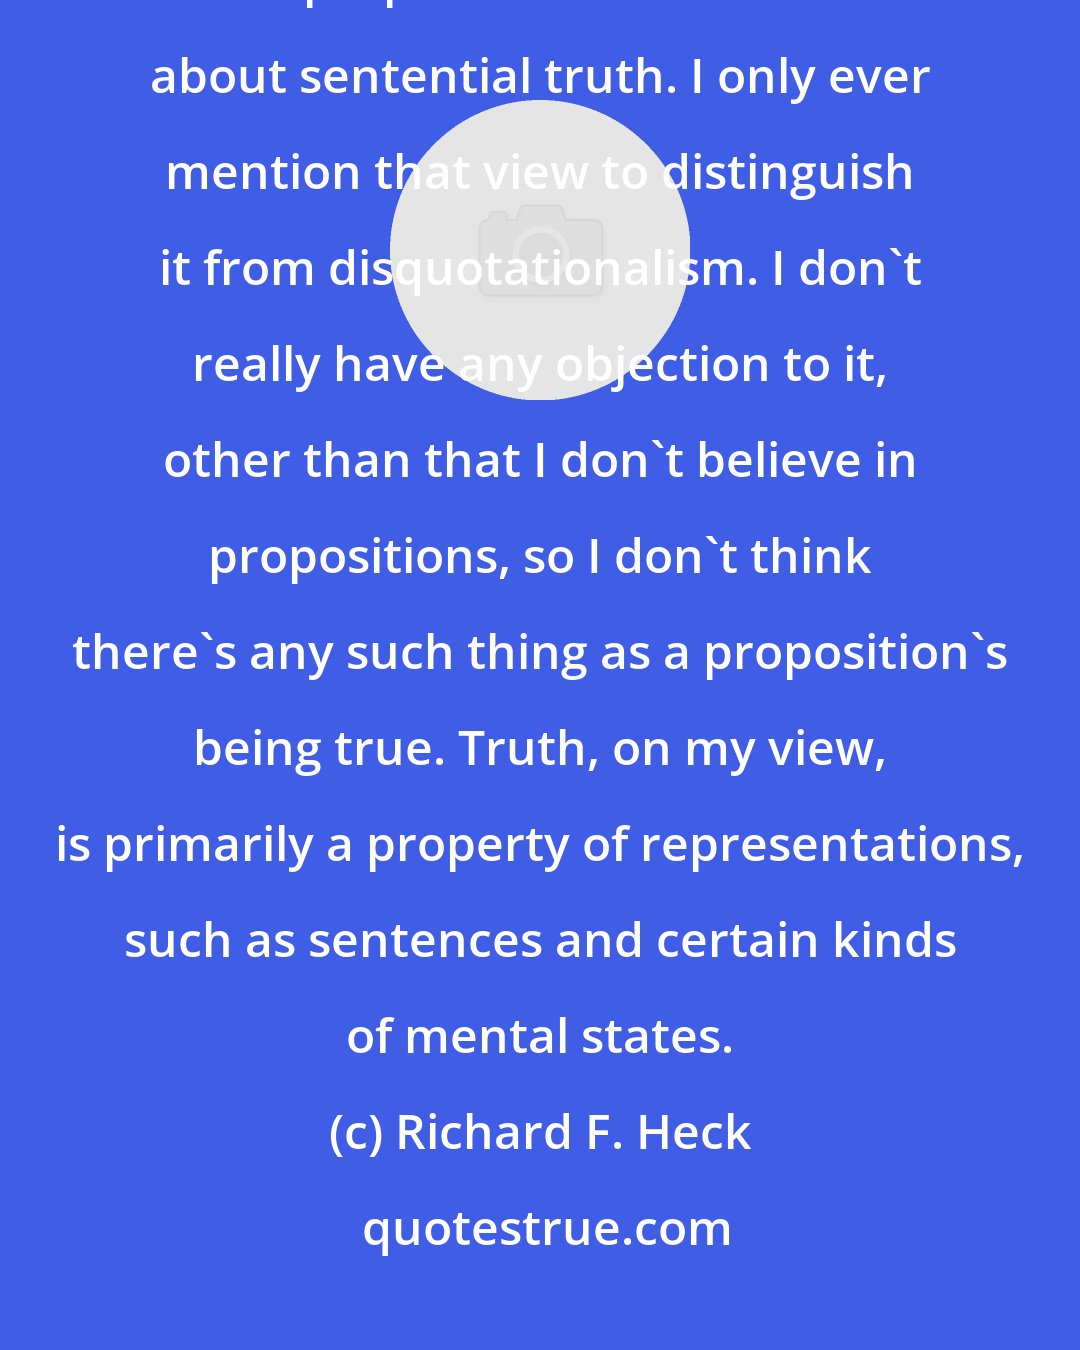 Richard F. Heck: Many people who call themselves deflationists are deflationists about propositional truth but not about sentential truth. I only ever mention that view to distinguish it from disquotationalism. I don't really have any objection to it, other than that I don't believe in propositions, so I don't think there's any such thing as a proposition's being true. Truth, on my view, is primarily a property of representations, such as sentences and certain kinds of mental states.